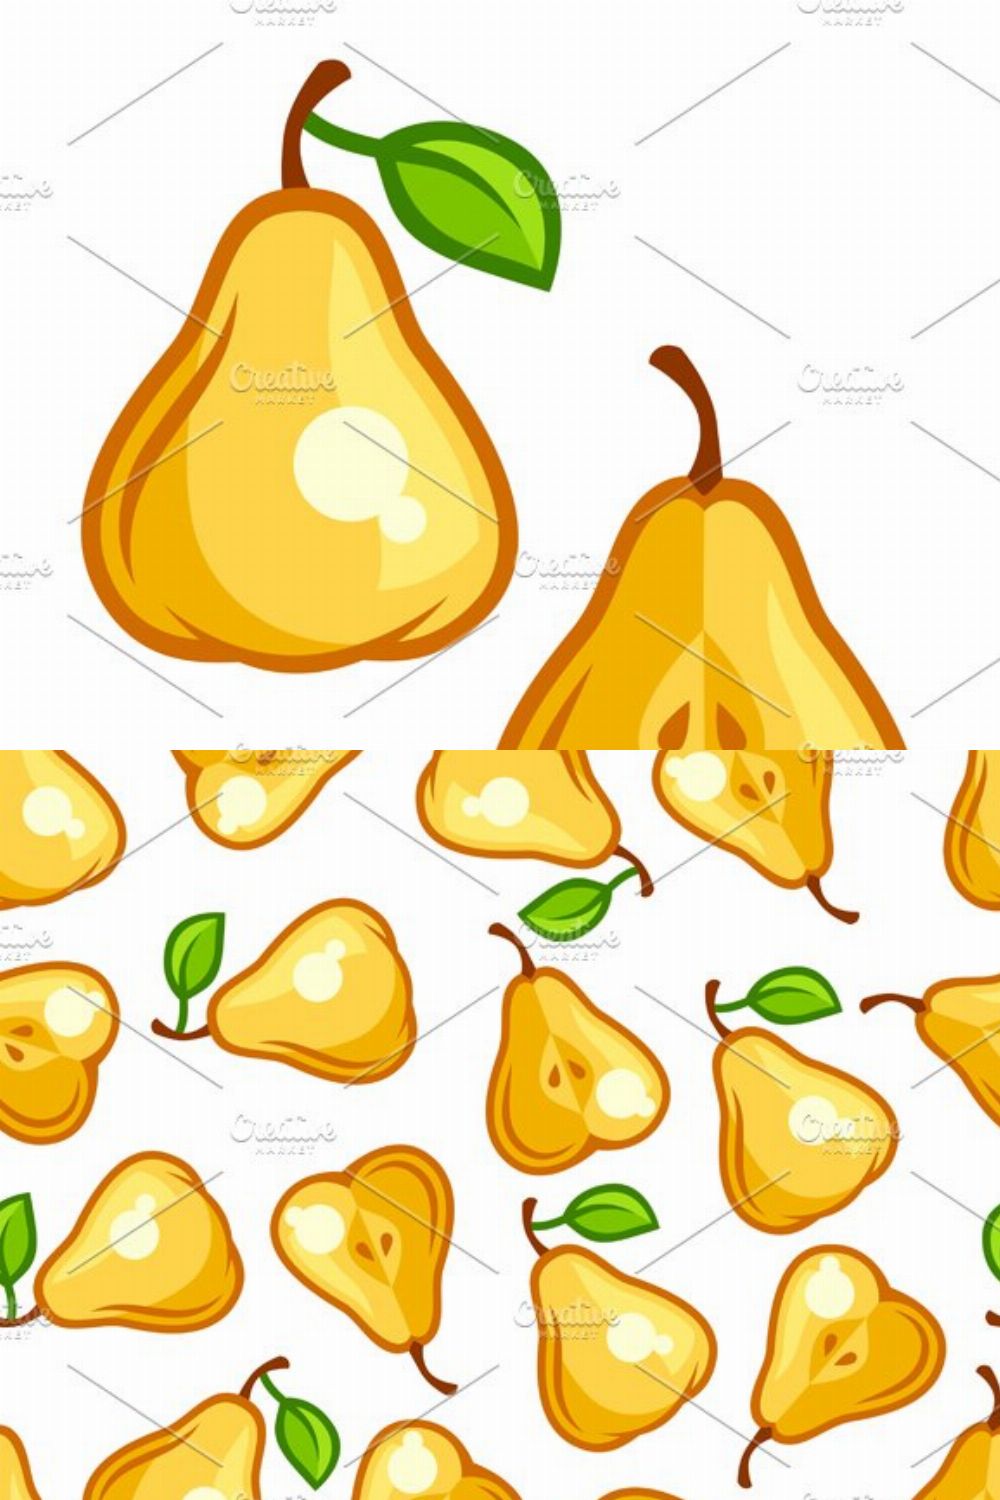 Pears. pinterest preview image.